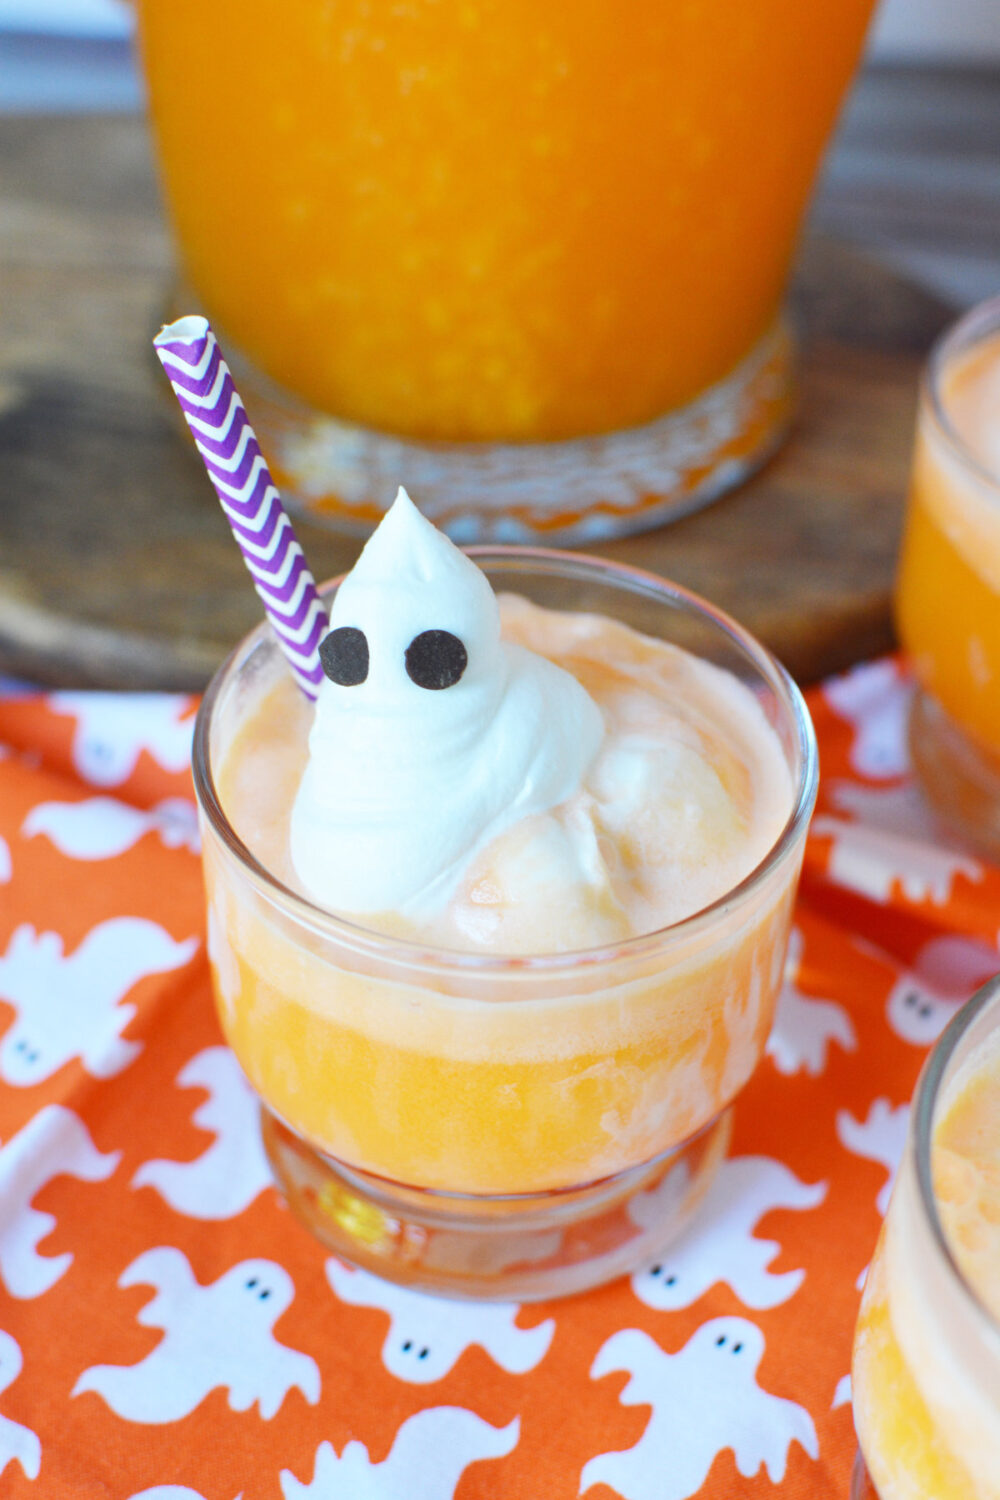 Orange punch with a whipped ghost topping with chocolate chip eyes. 